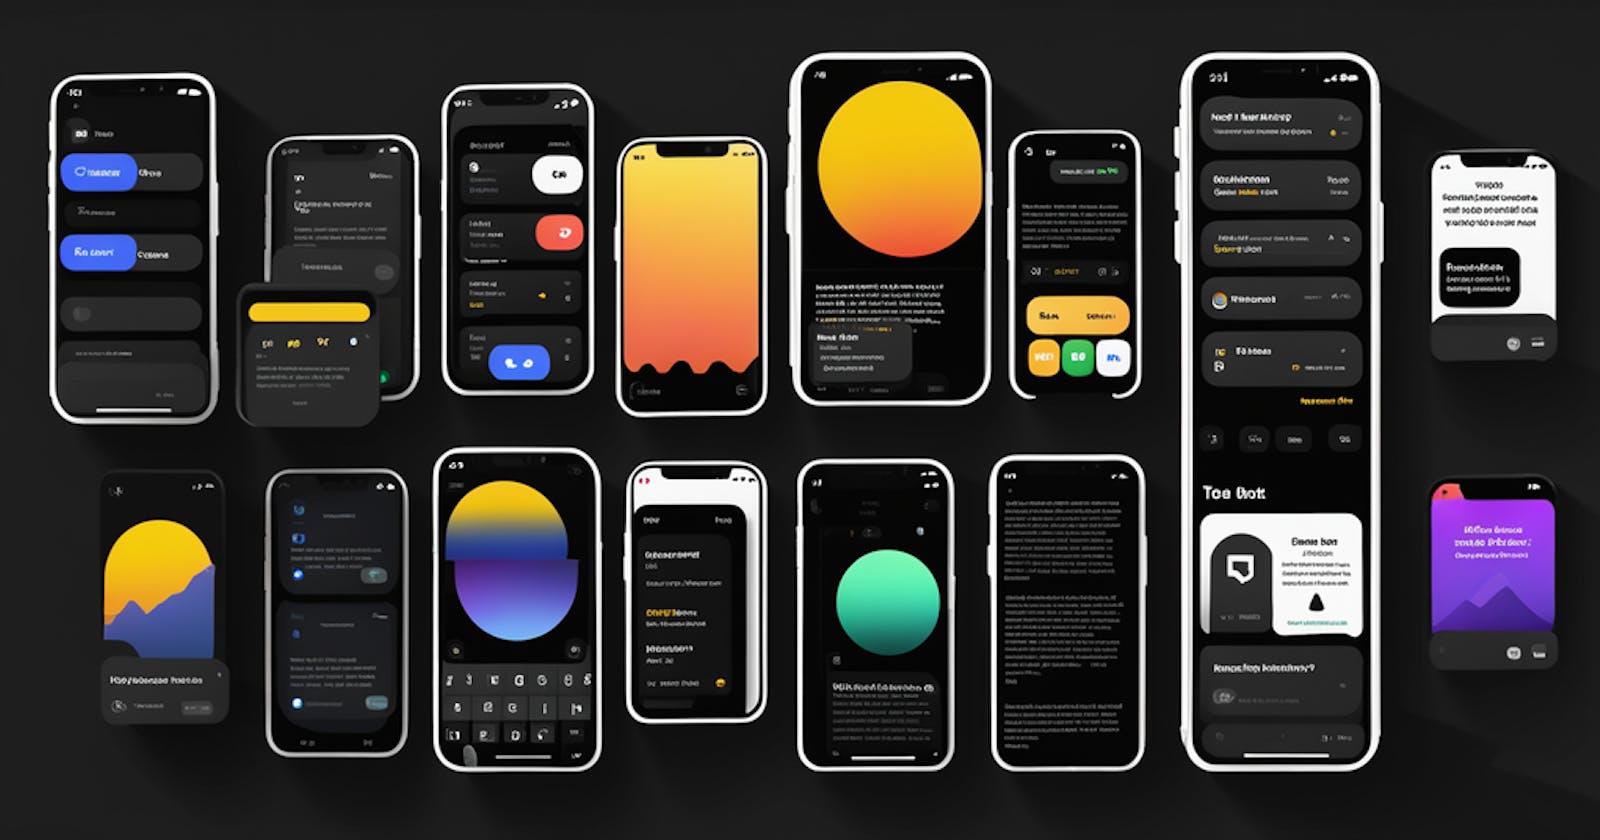 Dark mode design considerations for mobile apps